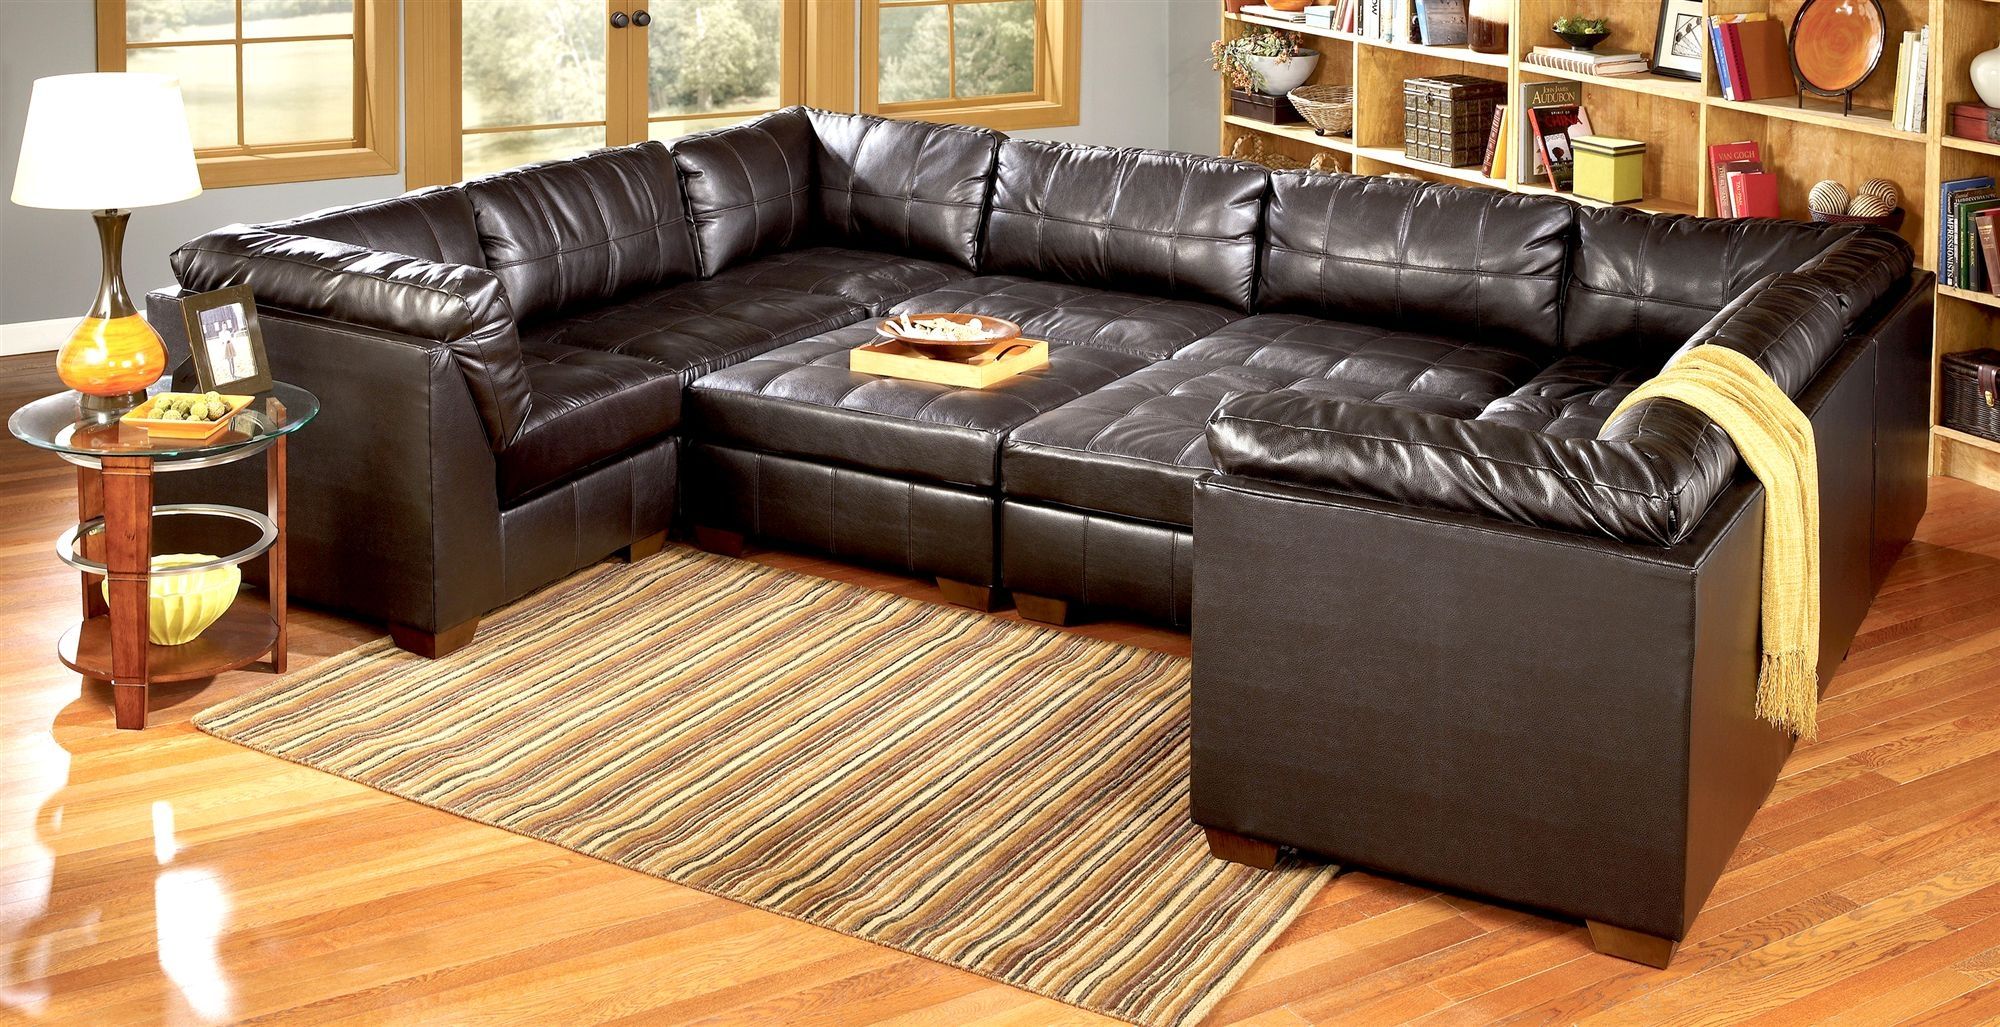 Amazing Pit Sectional Sofa 54 For Your Closeout Sectional Sofas In Closeout Sectional Sofas (View 4 of 12)